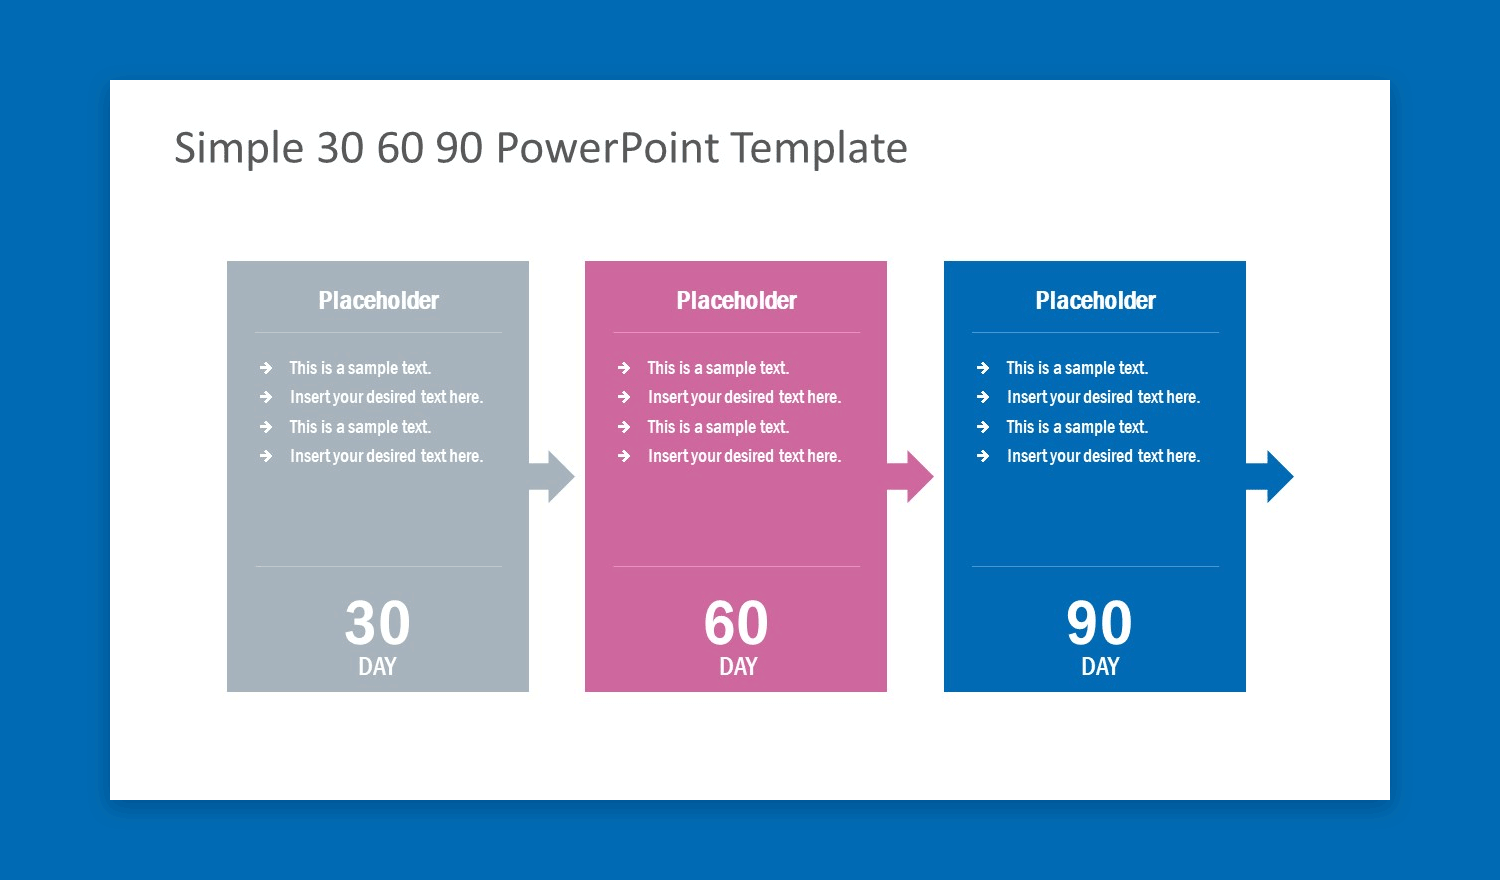 How To Make A 30 60 90 Day Plan In PowerPoint